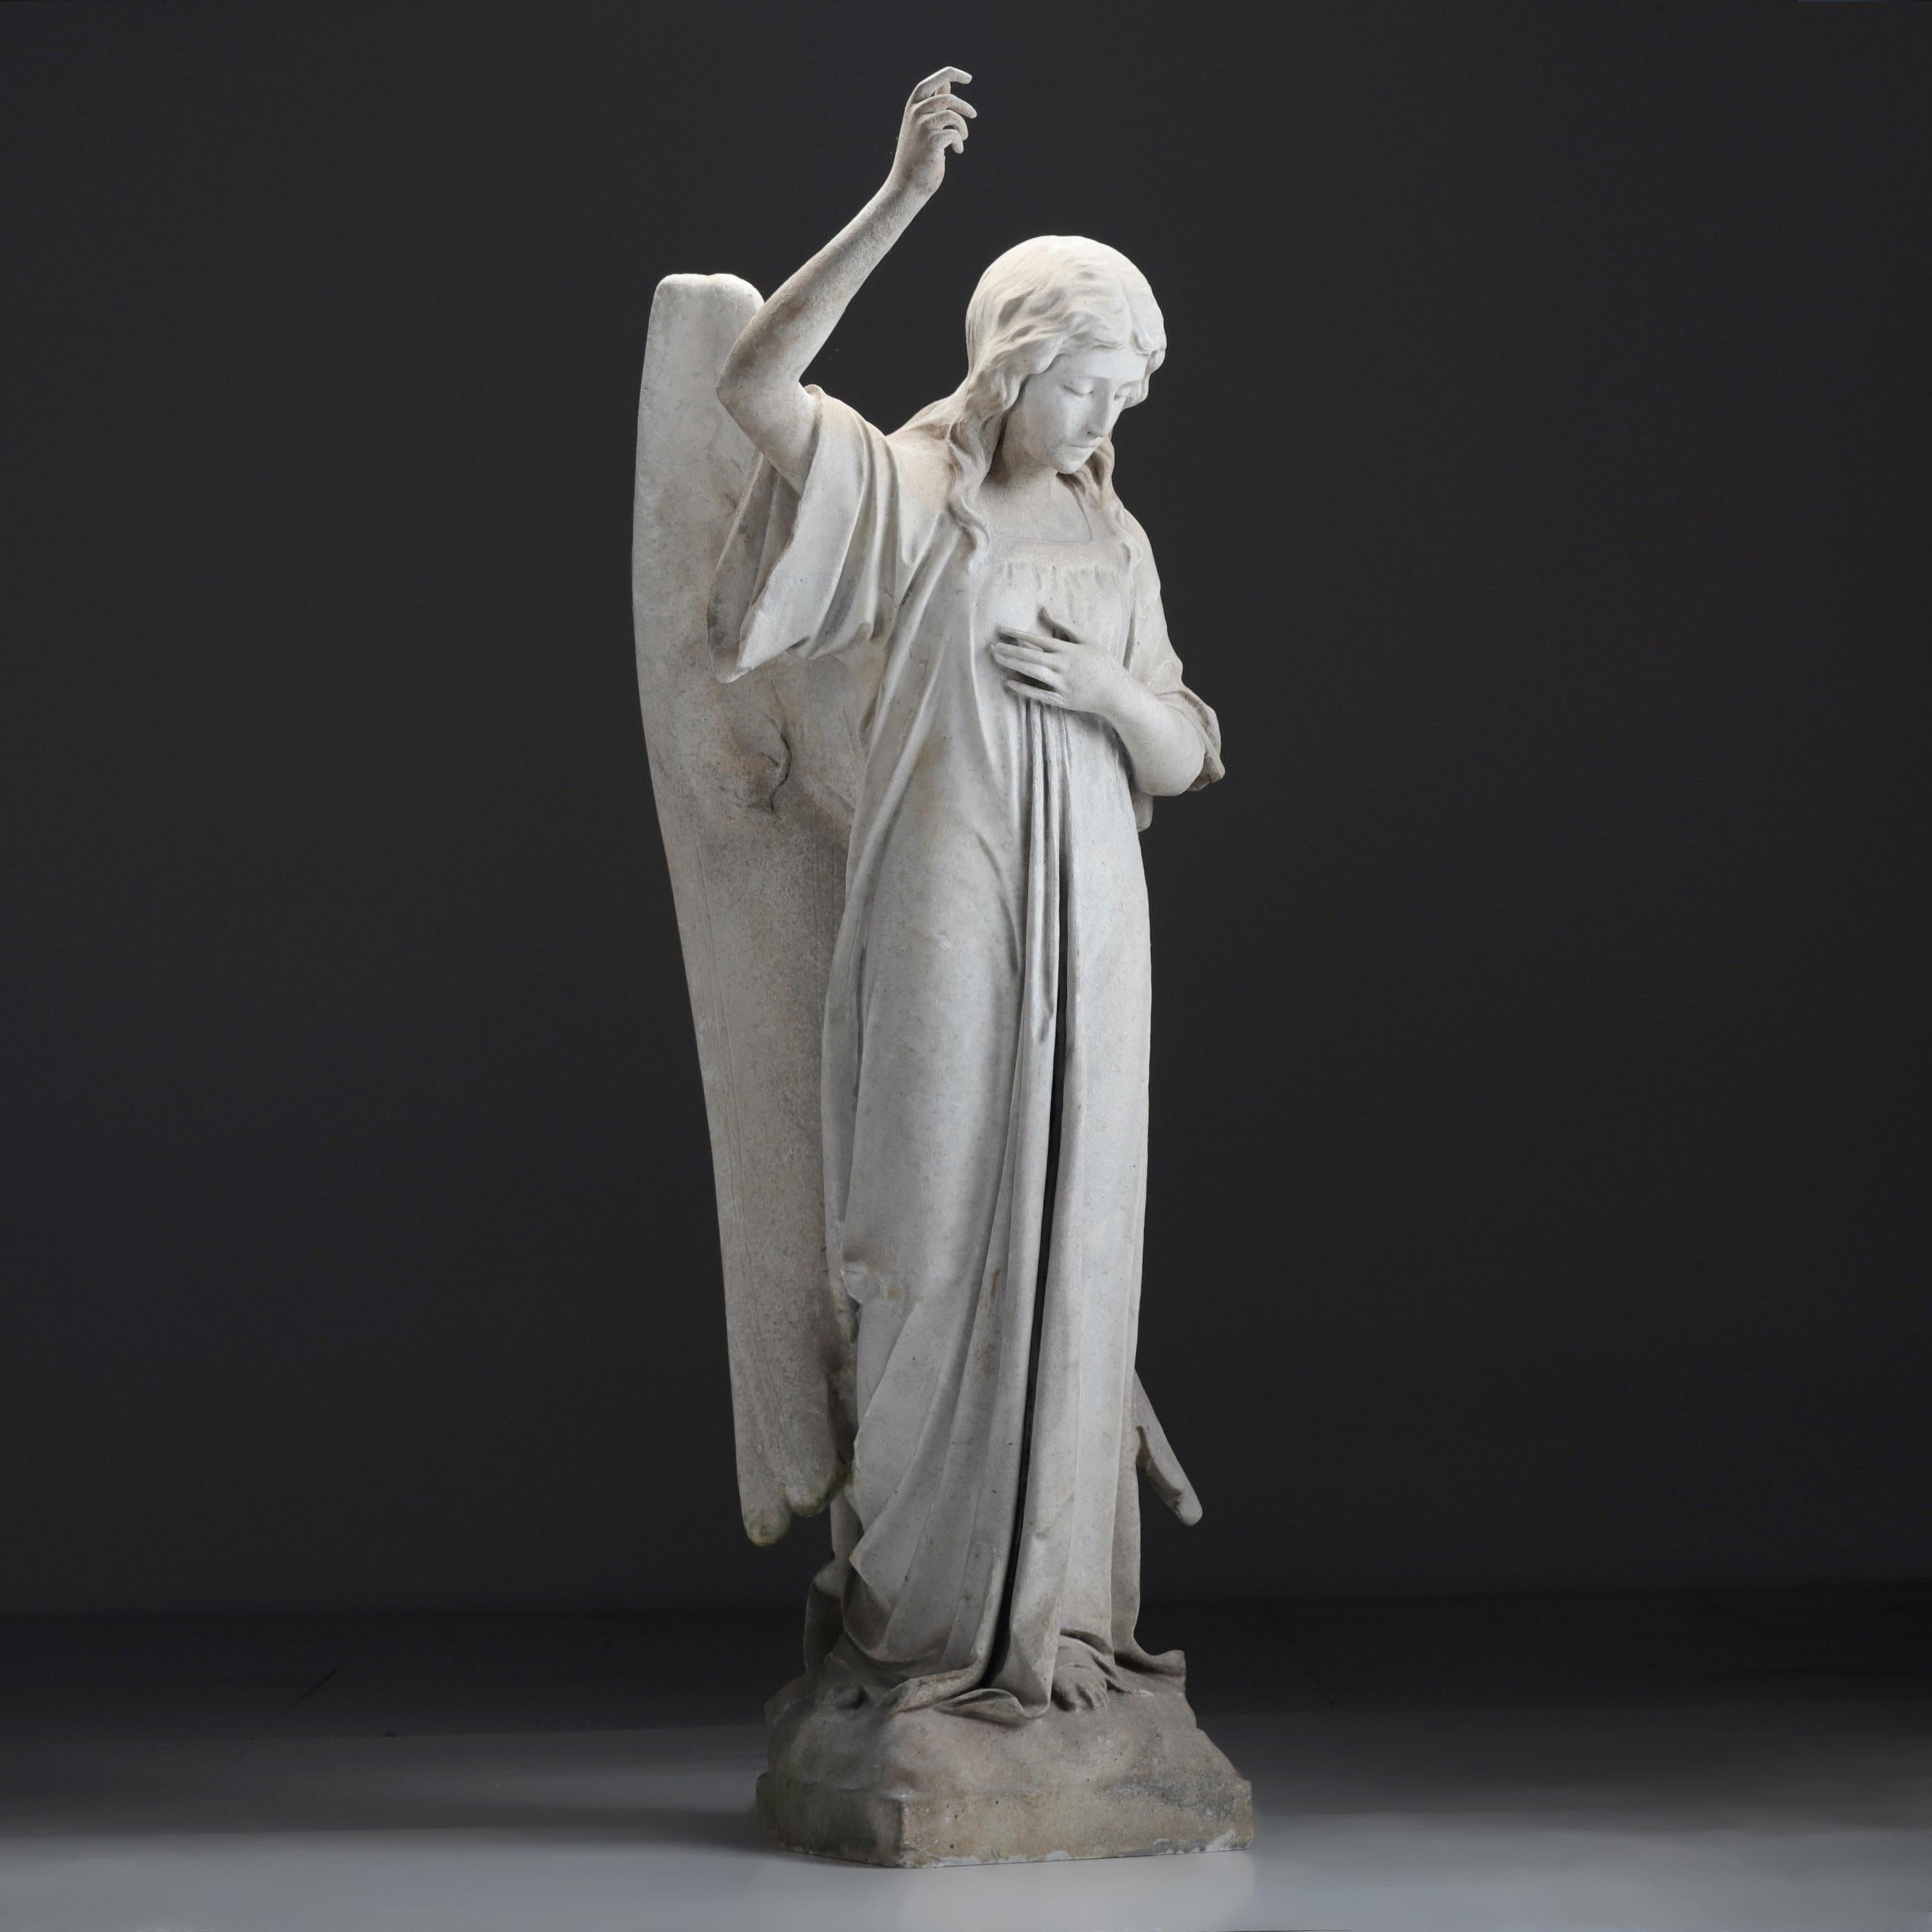 A CARVED MARBLE STATUE OF AN ANGEL, ENGLAND, Circa 1860
Originally from a church, this impressive marble statue has a certain peaceful quality, the marble is weathered to a soft, dusty pale grey colour, the whole statue has a peaceful and quite